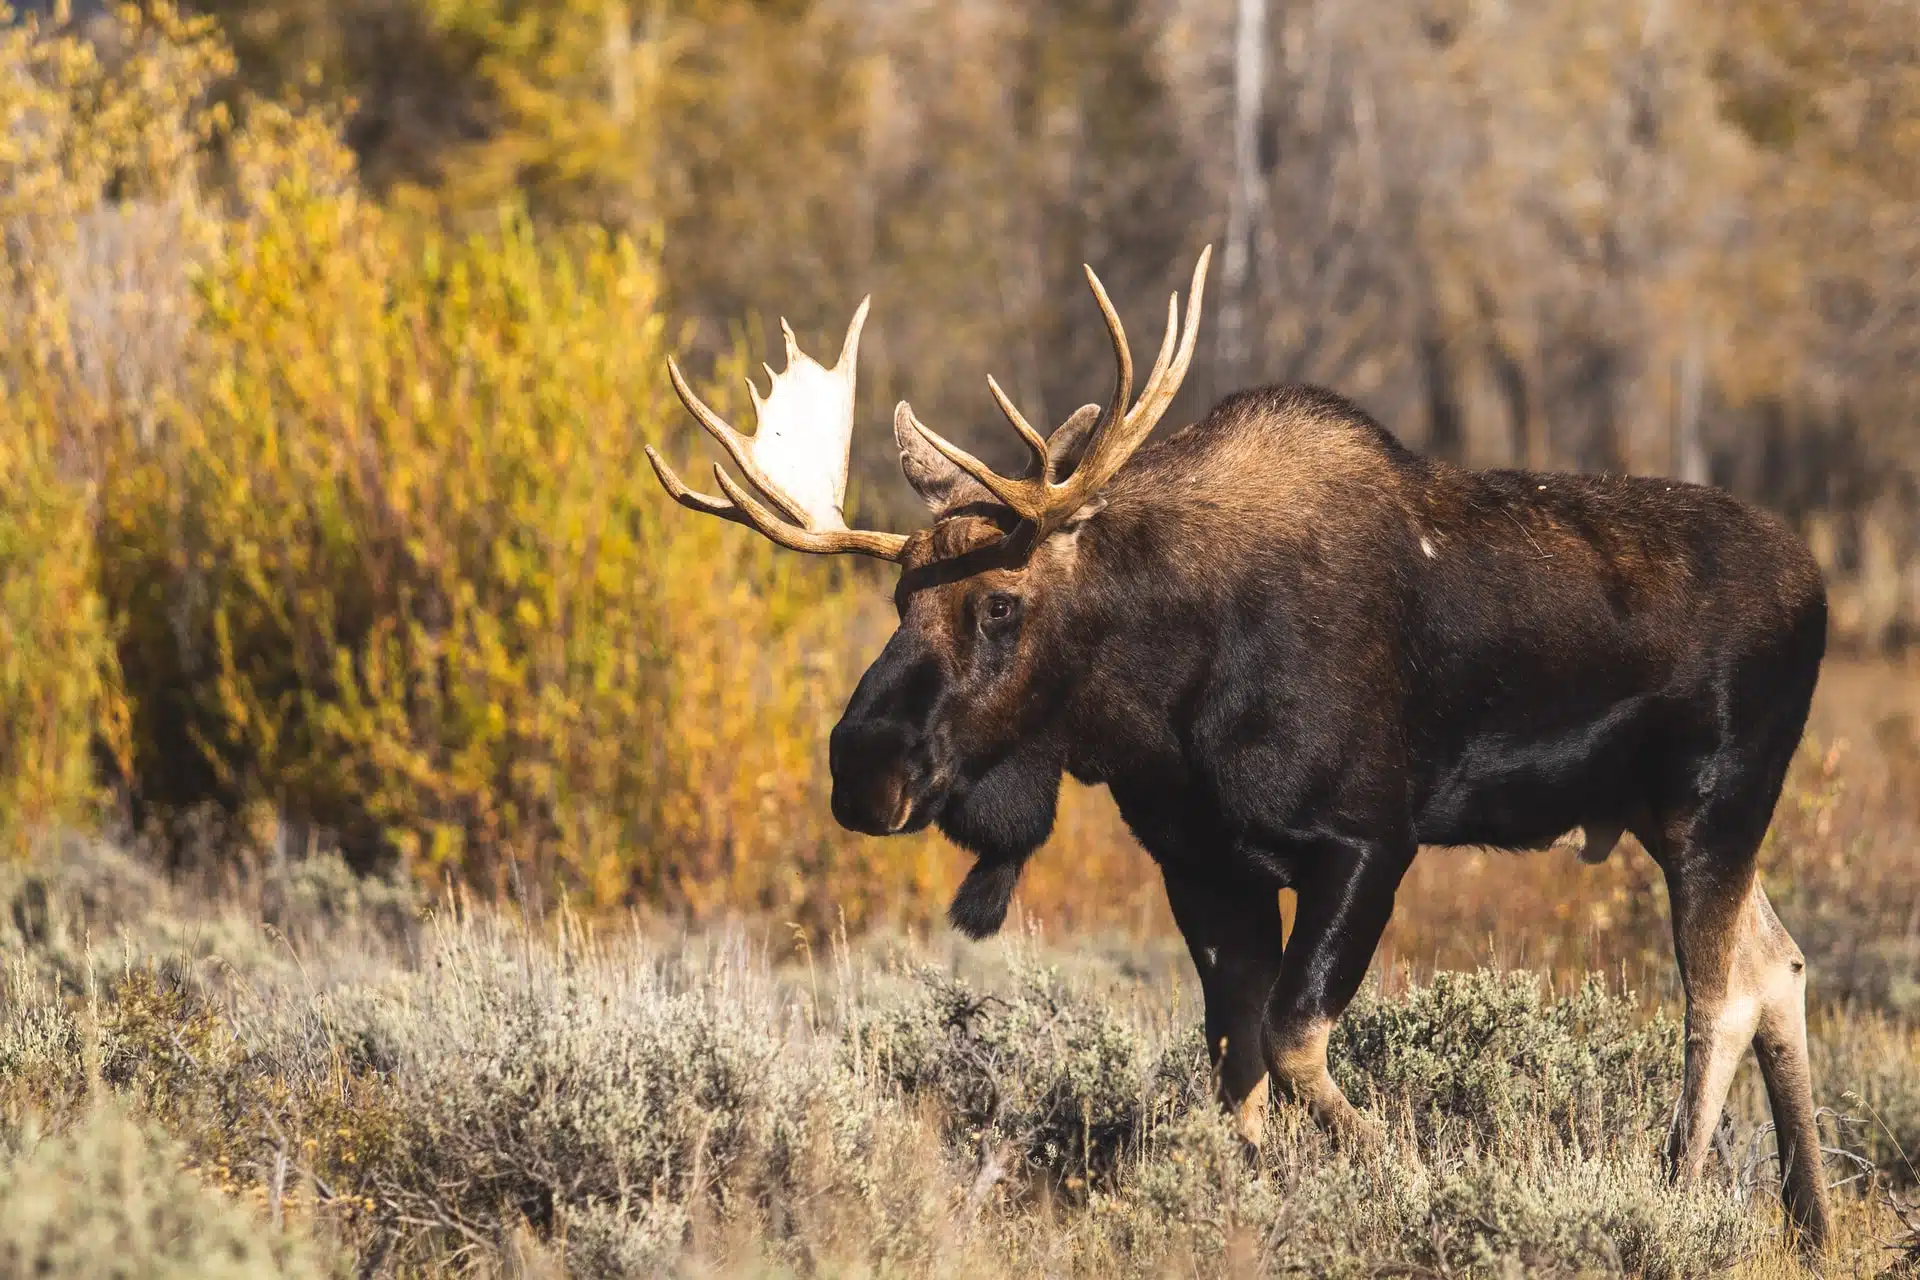 A moose standing in front of a forest.